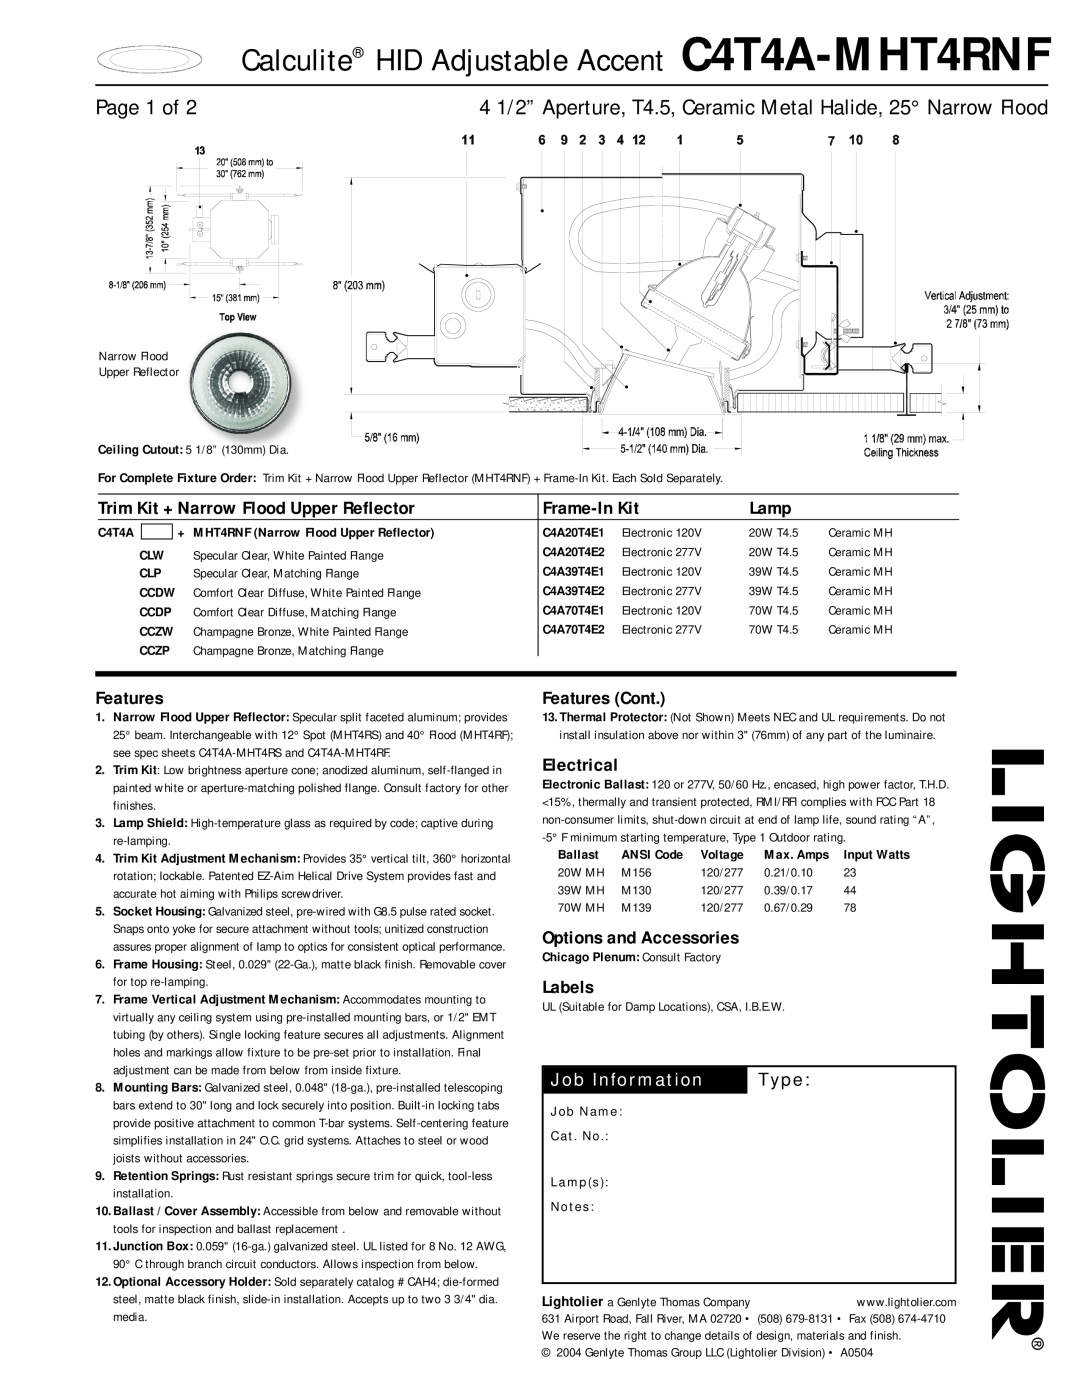 Lightolier none manual Calculite HID Adjustable Accent C4T4A-MHT4RNF, Page 1 of, Job Information, Type, Frame-InKit, Lamp 